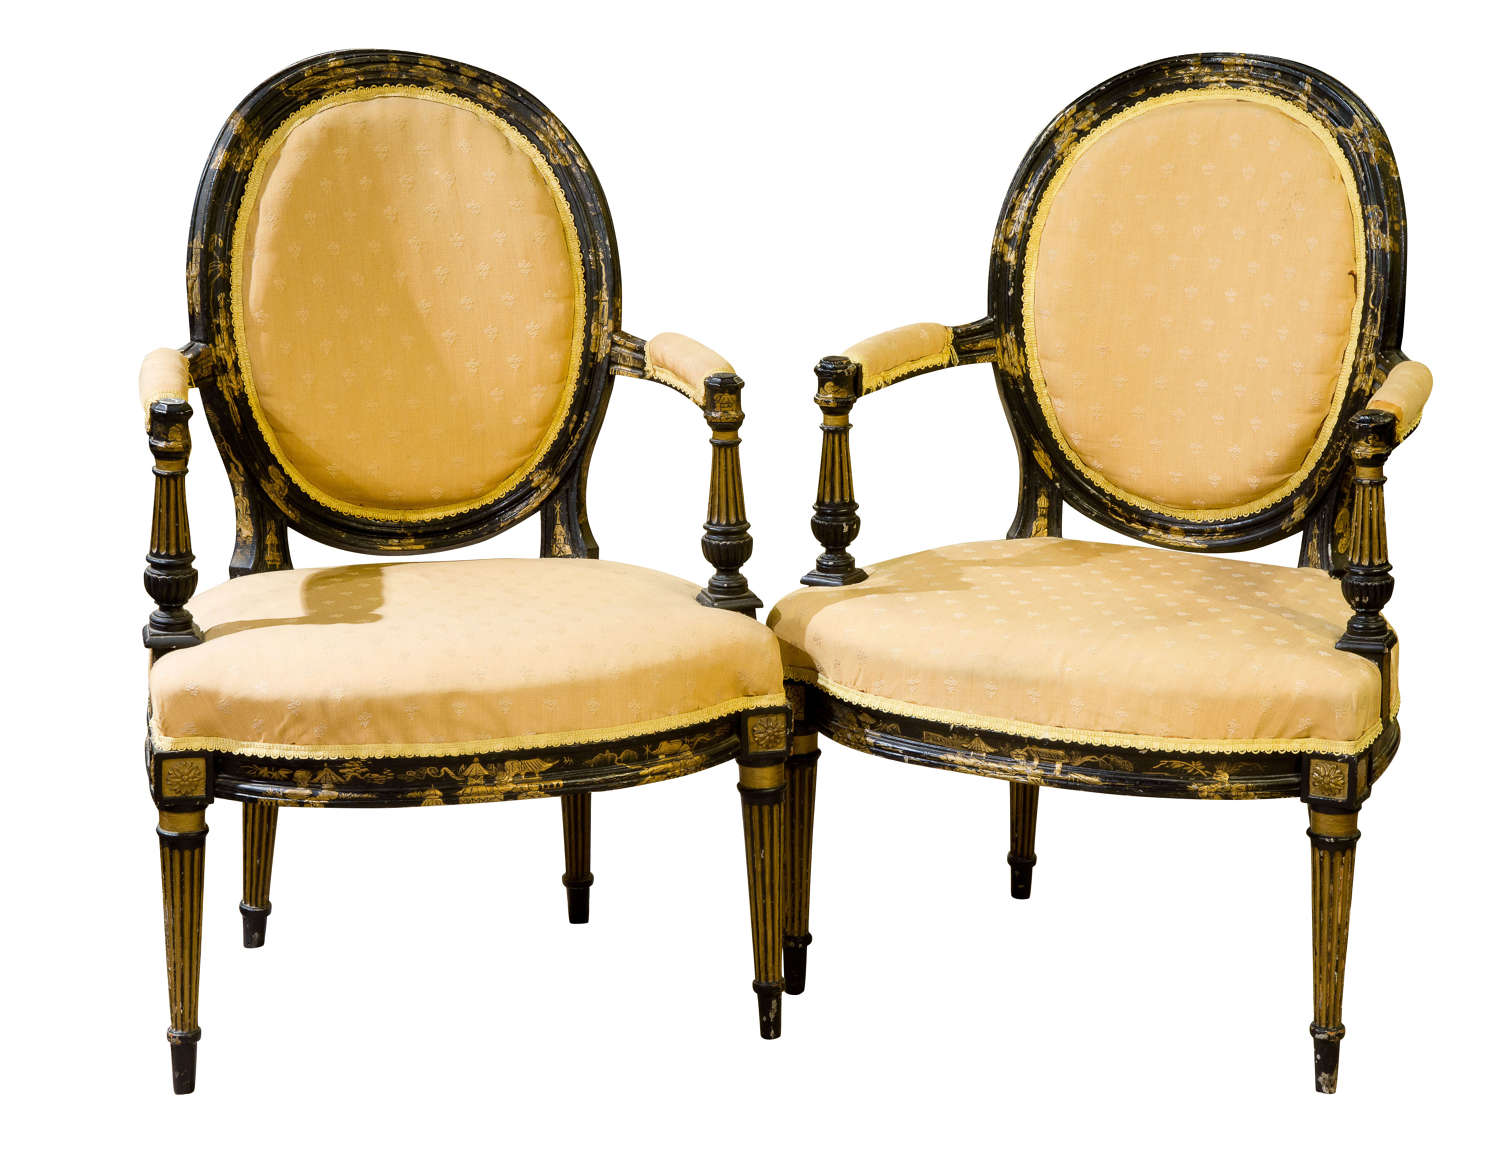 Pair of 19th black lacquered elbow chairs c1865